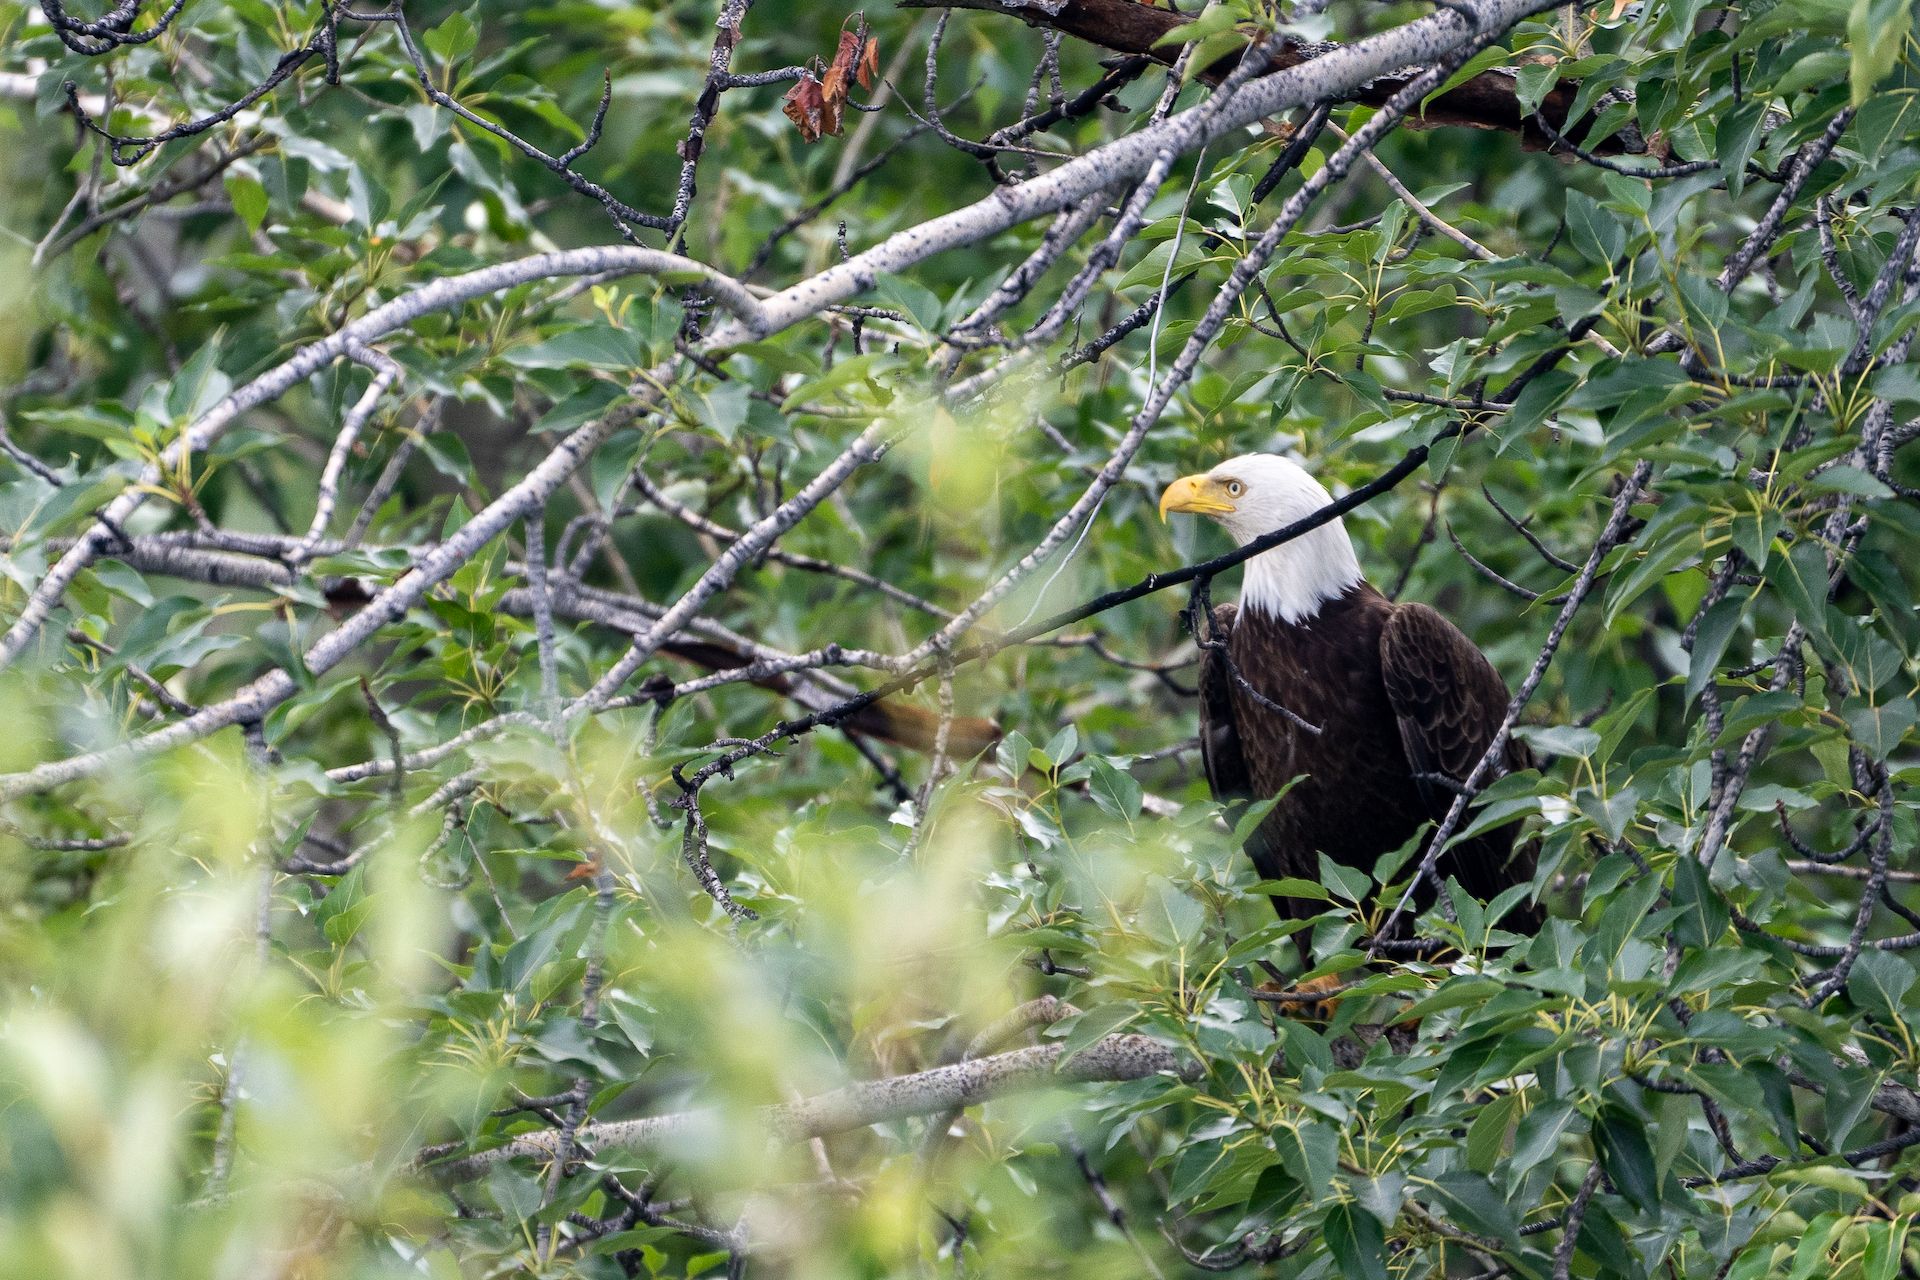 A bald eagle resting just by the side of the road